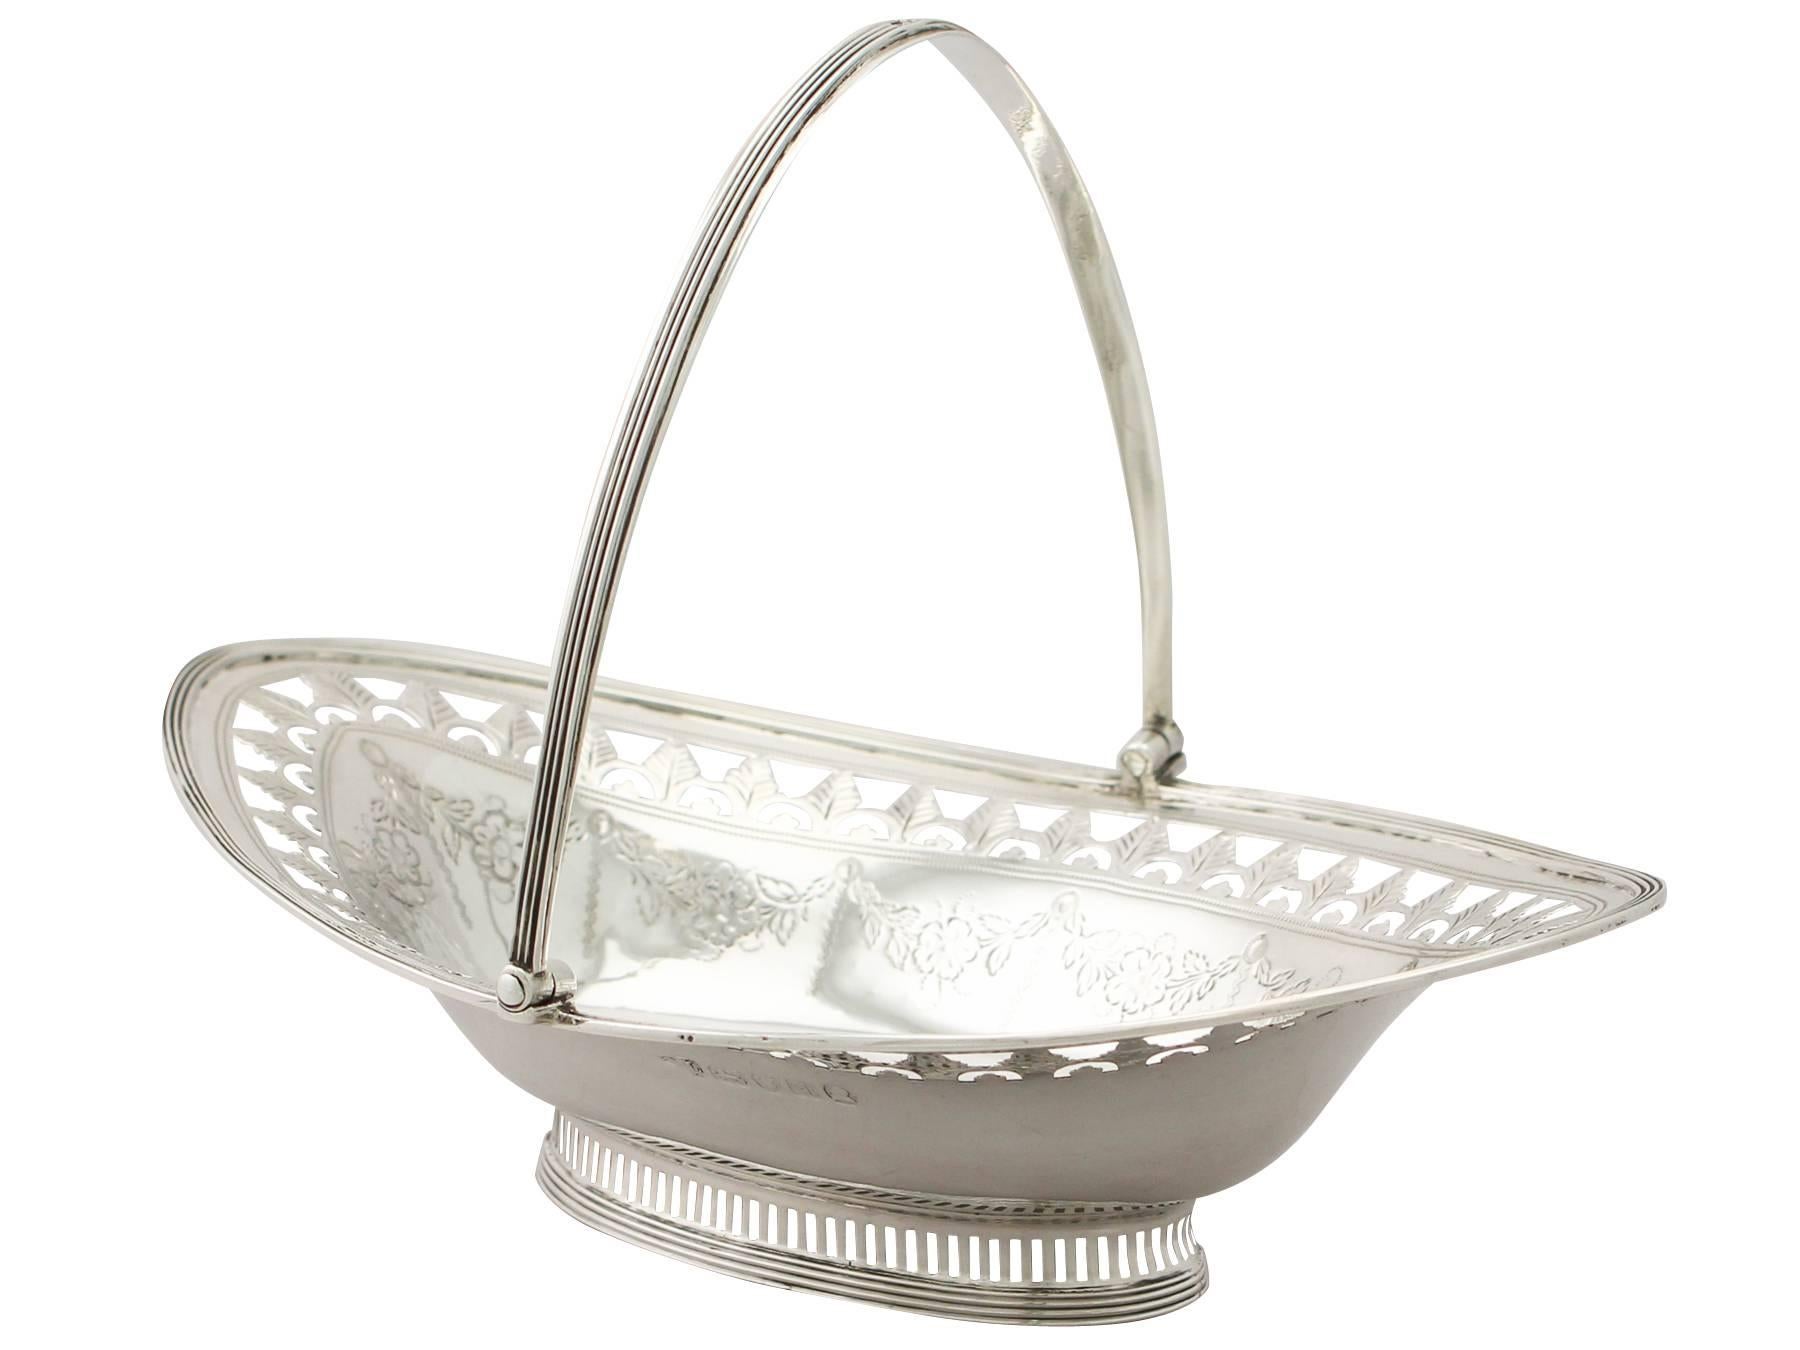 A fine antique Georgian English sterling silver swing-handled sweetmeat basket; an addition to our ornamental silverware collection

This fine antique Georgian sterling silver basket has an oval rounded navette shaped form onto an oval collet style